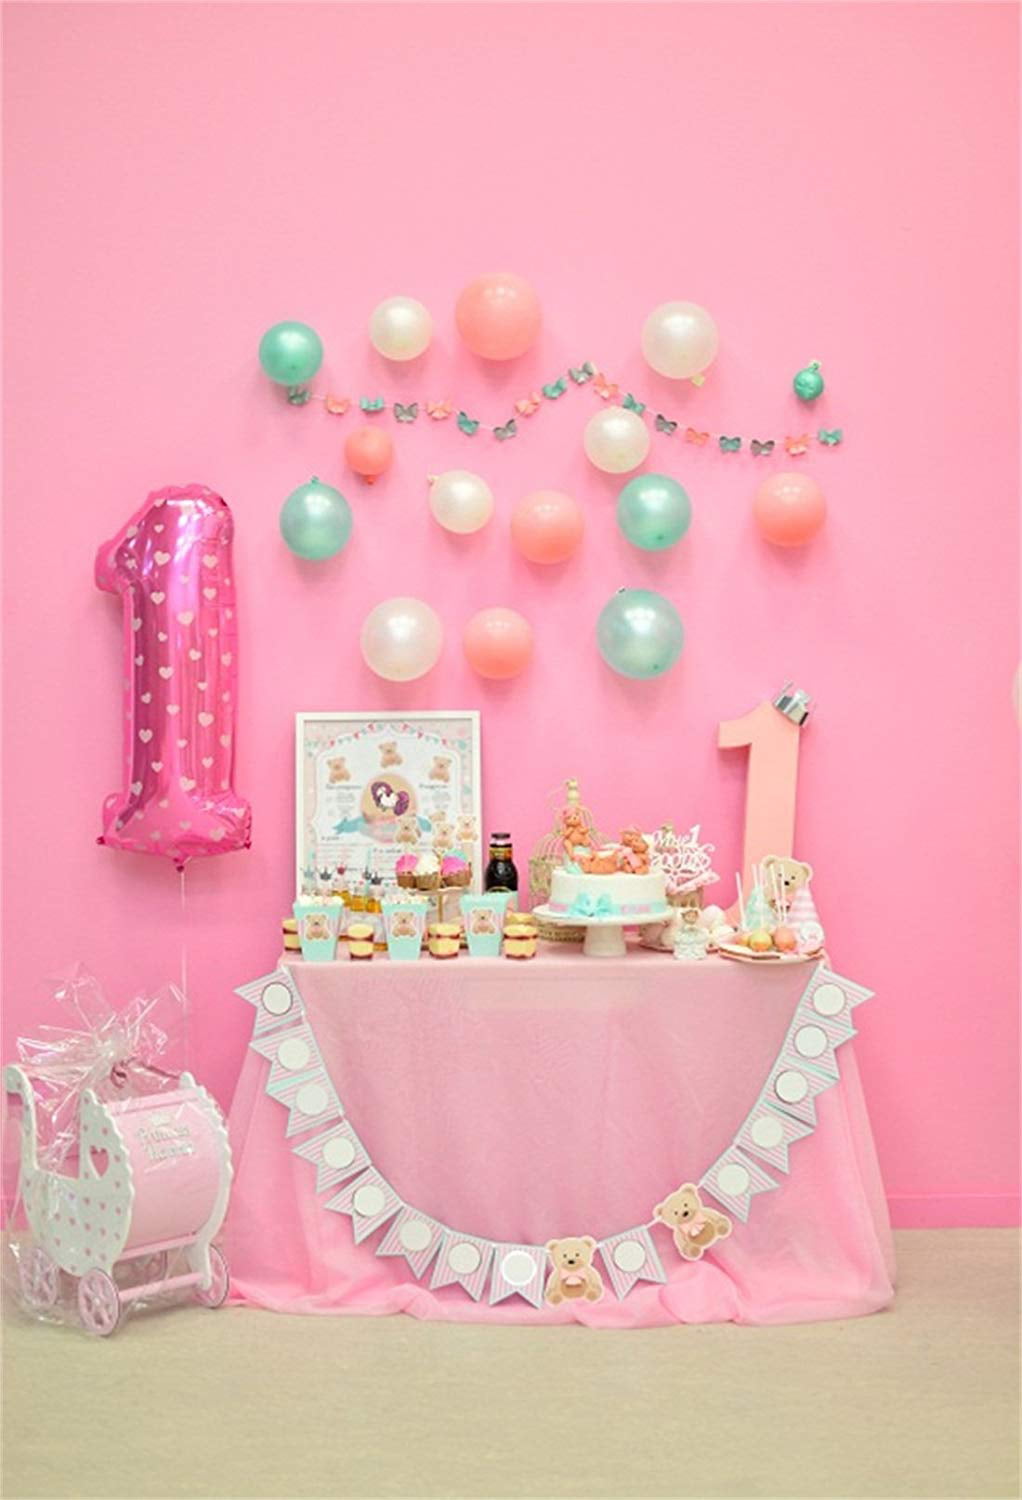 OERJU 15x10ft Sweet Baby 1st Birthday Backdrop Balloons Interior Girl One Year Old First Bday Party Photography Background Cake Dessert Table Decoration Photo Studio Props Vinyl